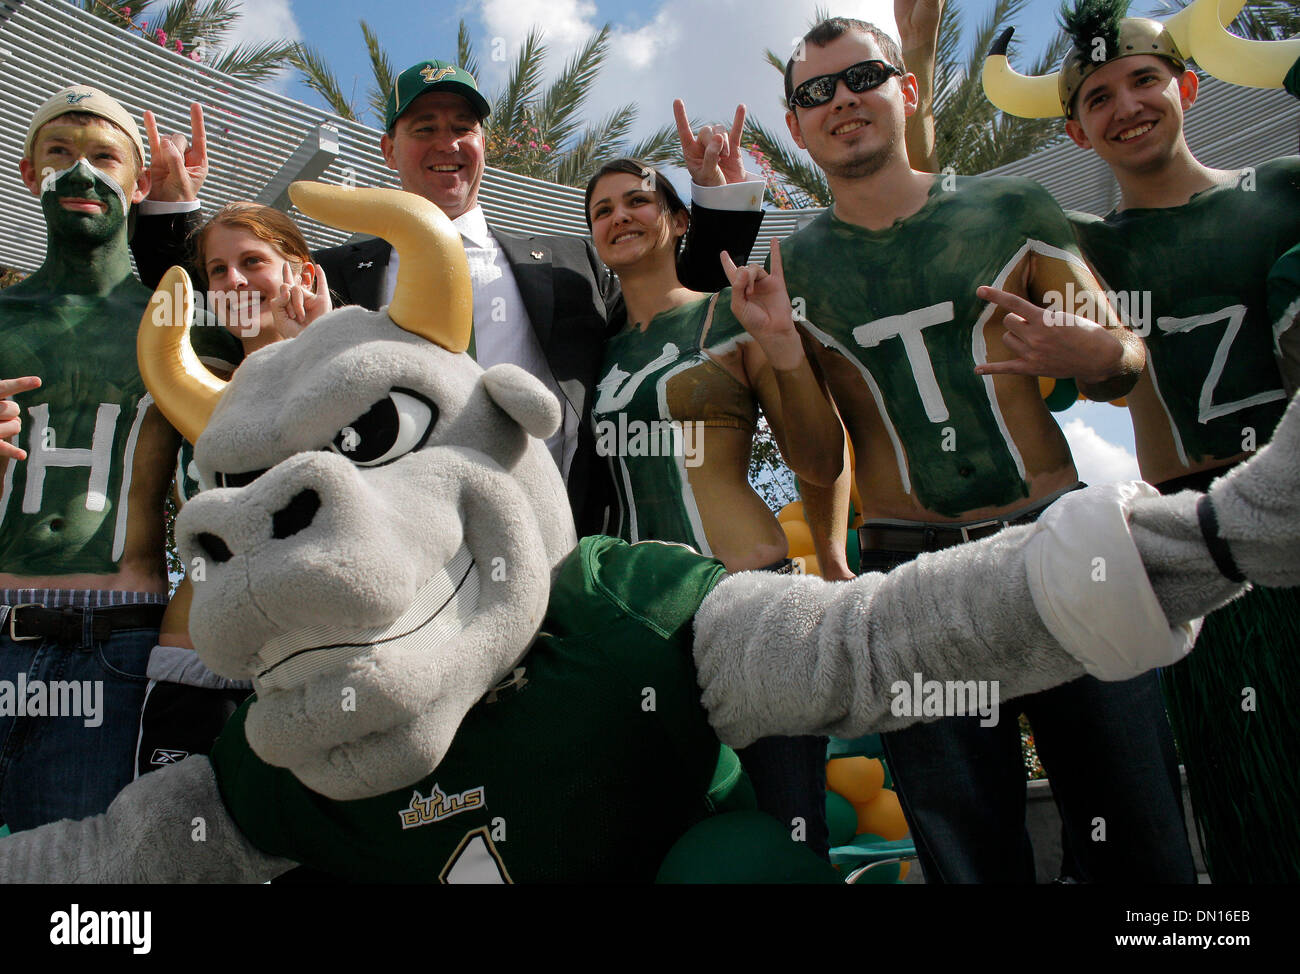 Jan. 15, 2010 - Tampa, FL, USA - EDMUND D. FOUNTAIN   |   Times .TP 317359 FOUN USF 8.(01/15/2010 Tampa) Newly hired USF football coach Skip Holtz poses for pictures with USF football fans and Rocky, the school's mascot, on January 15, 2009 in Tampa. Holtz was publicly named the new football coach at the university of South Florida during a press conference on January 15, 2009 in T Stock Photo